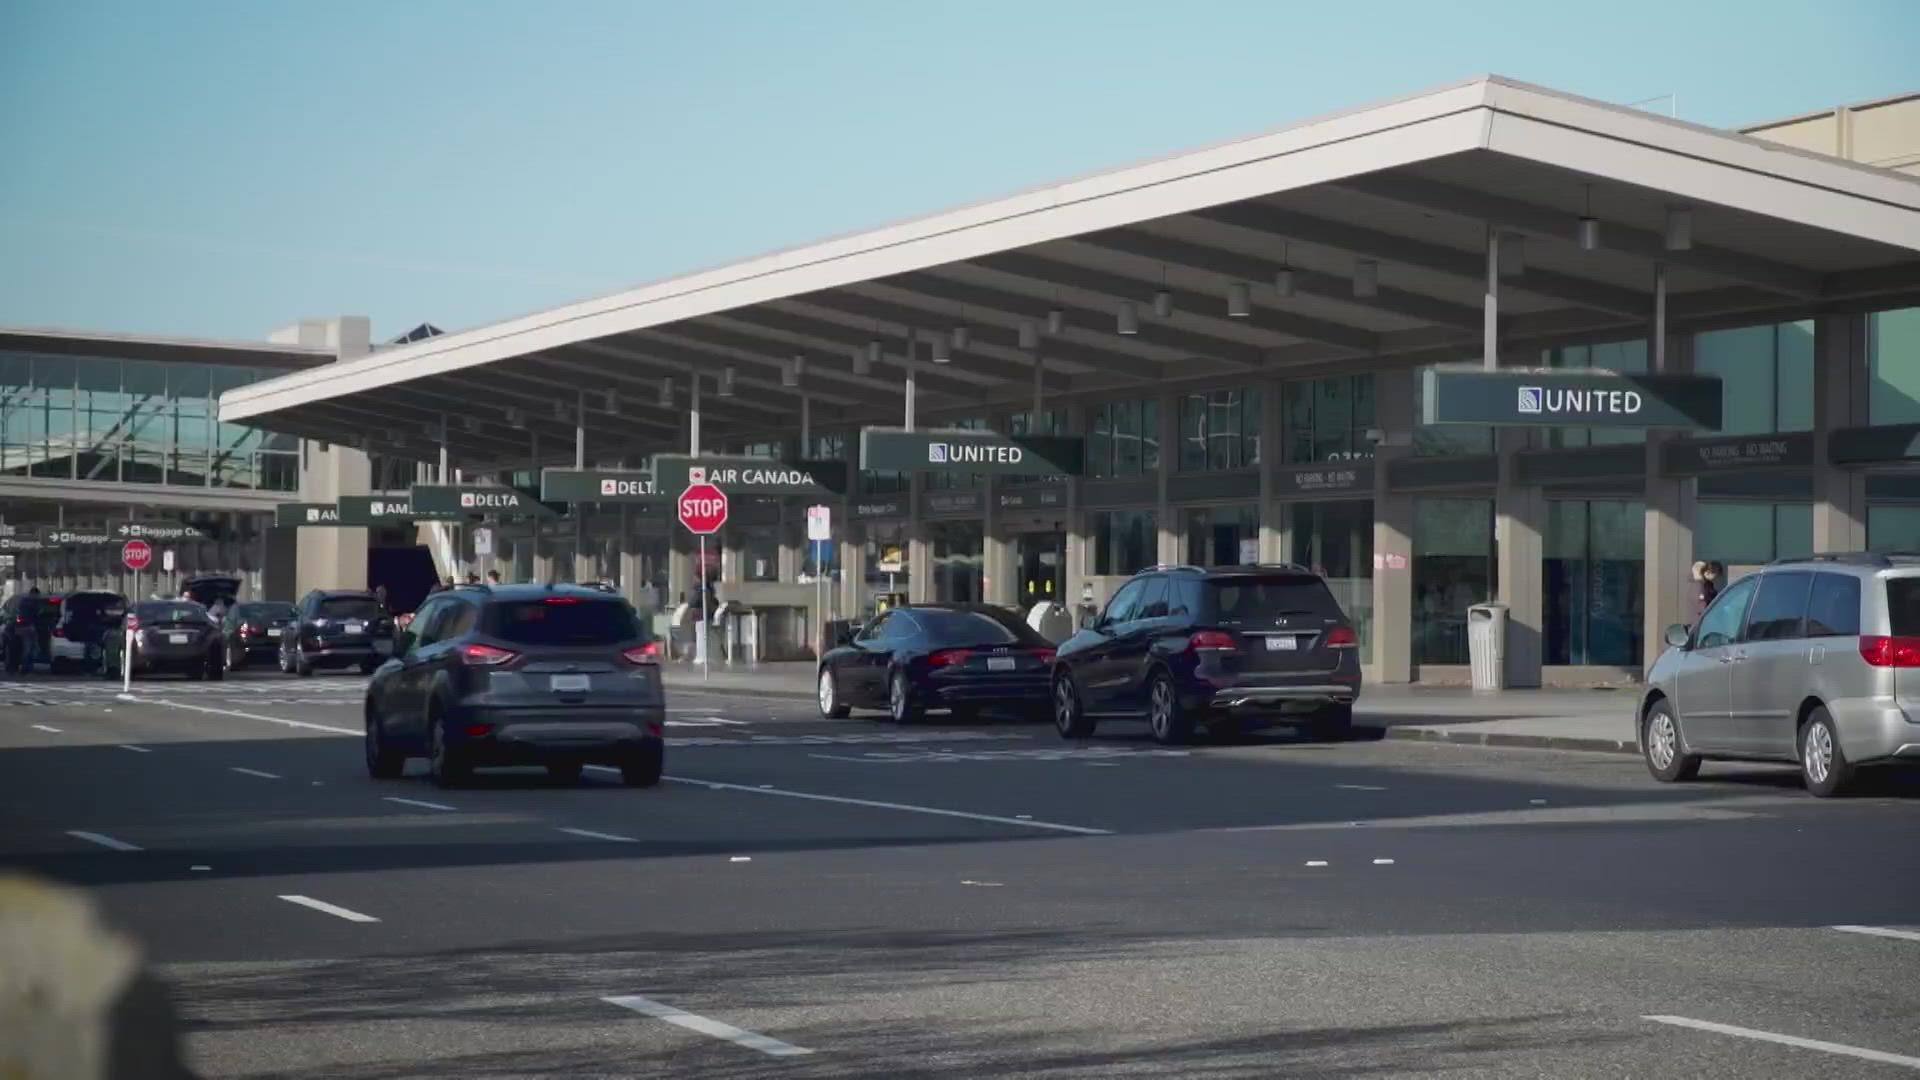 The Sacramento International Airport plans improvement projects that will take place over the next seven years, which have an estimated cost of $1.3 billion dollars.